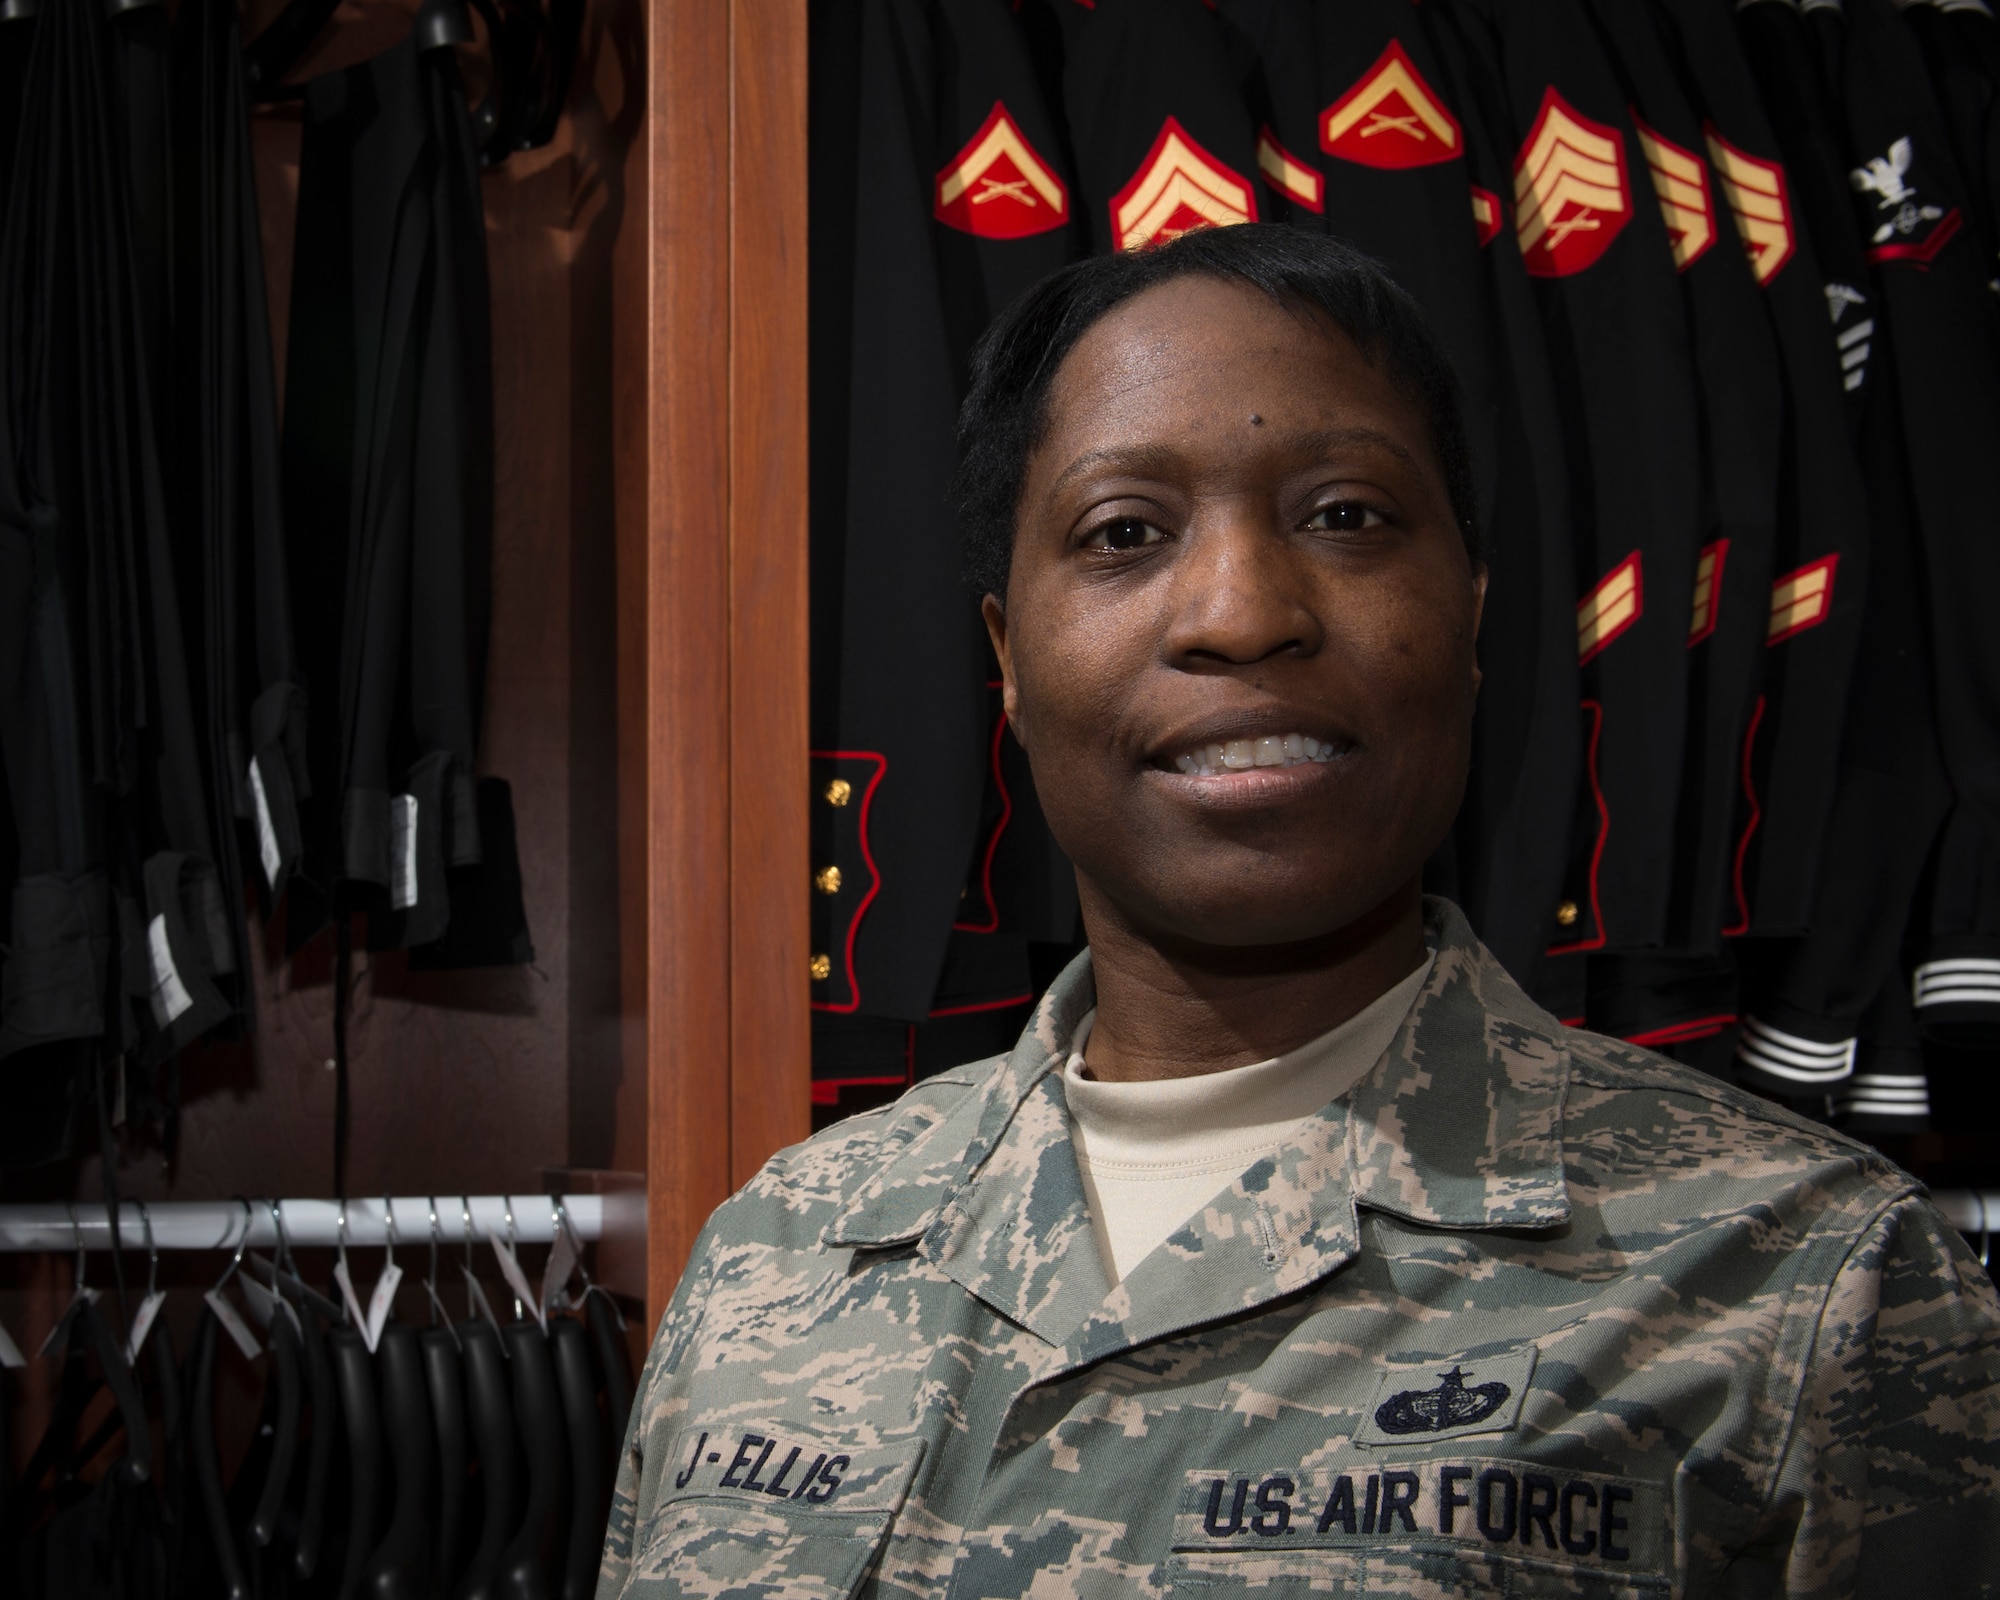 Master Sgt. Enid J-Ellis, 512th Memorial Affairs Squadron, Dover Air Force Base, Del., poses in the uniform preparation section of the Charles C. Carson Center for Mortuary Affairs Feb. 23, 2015. J-Ellis, is currently serving on her fourteenth deployment to the mortuary. She is pursuing a career as a funeral director as a result of her experience. (U.S. Air Force photo by Capt. Raymond Geoffroy)